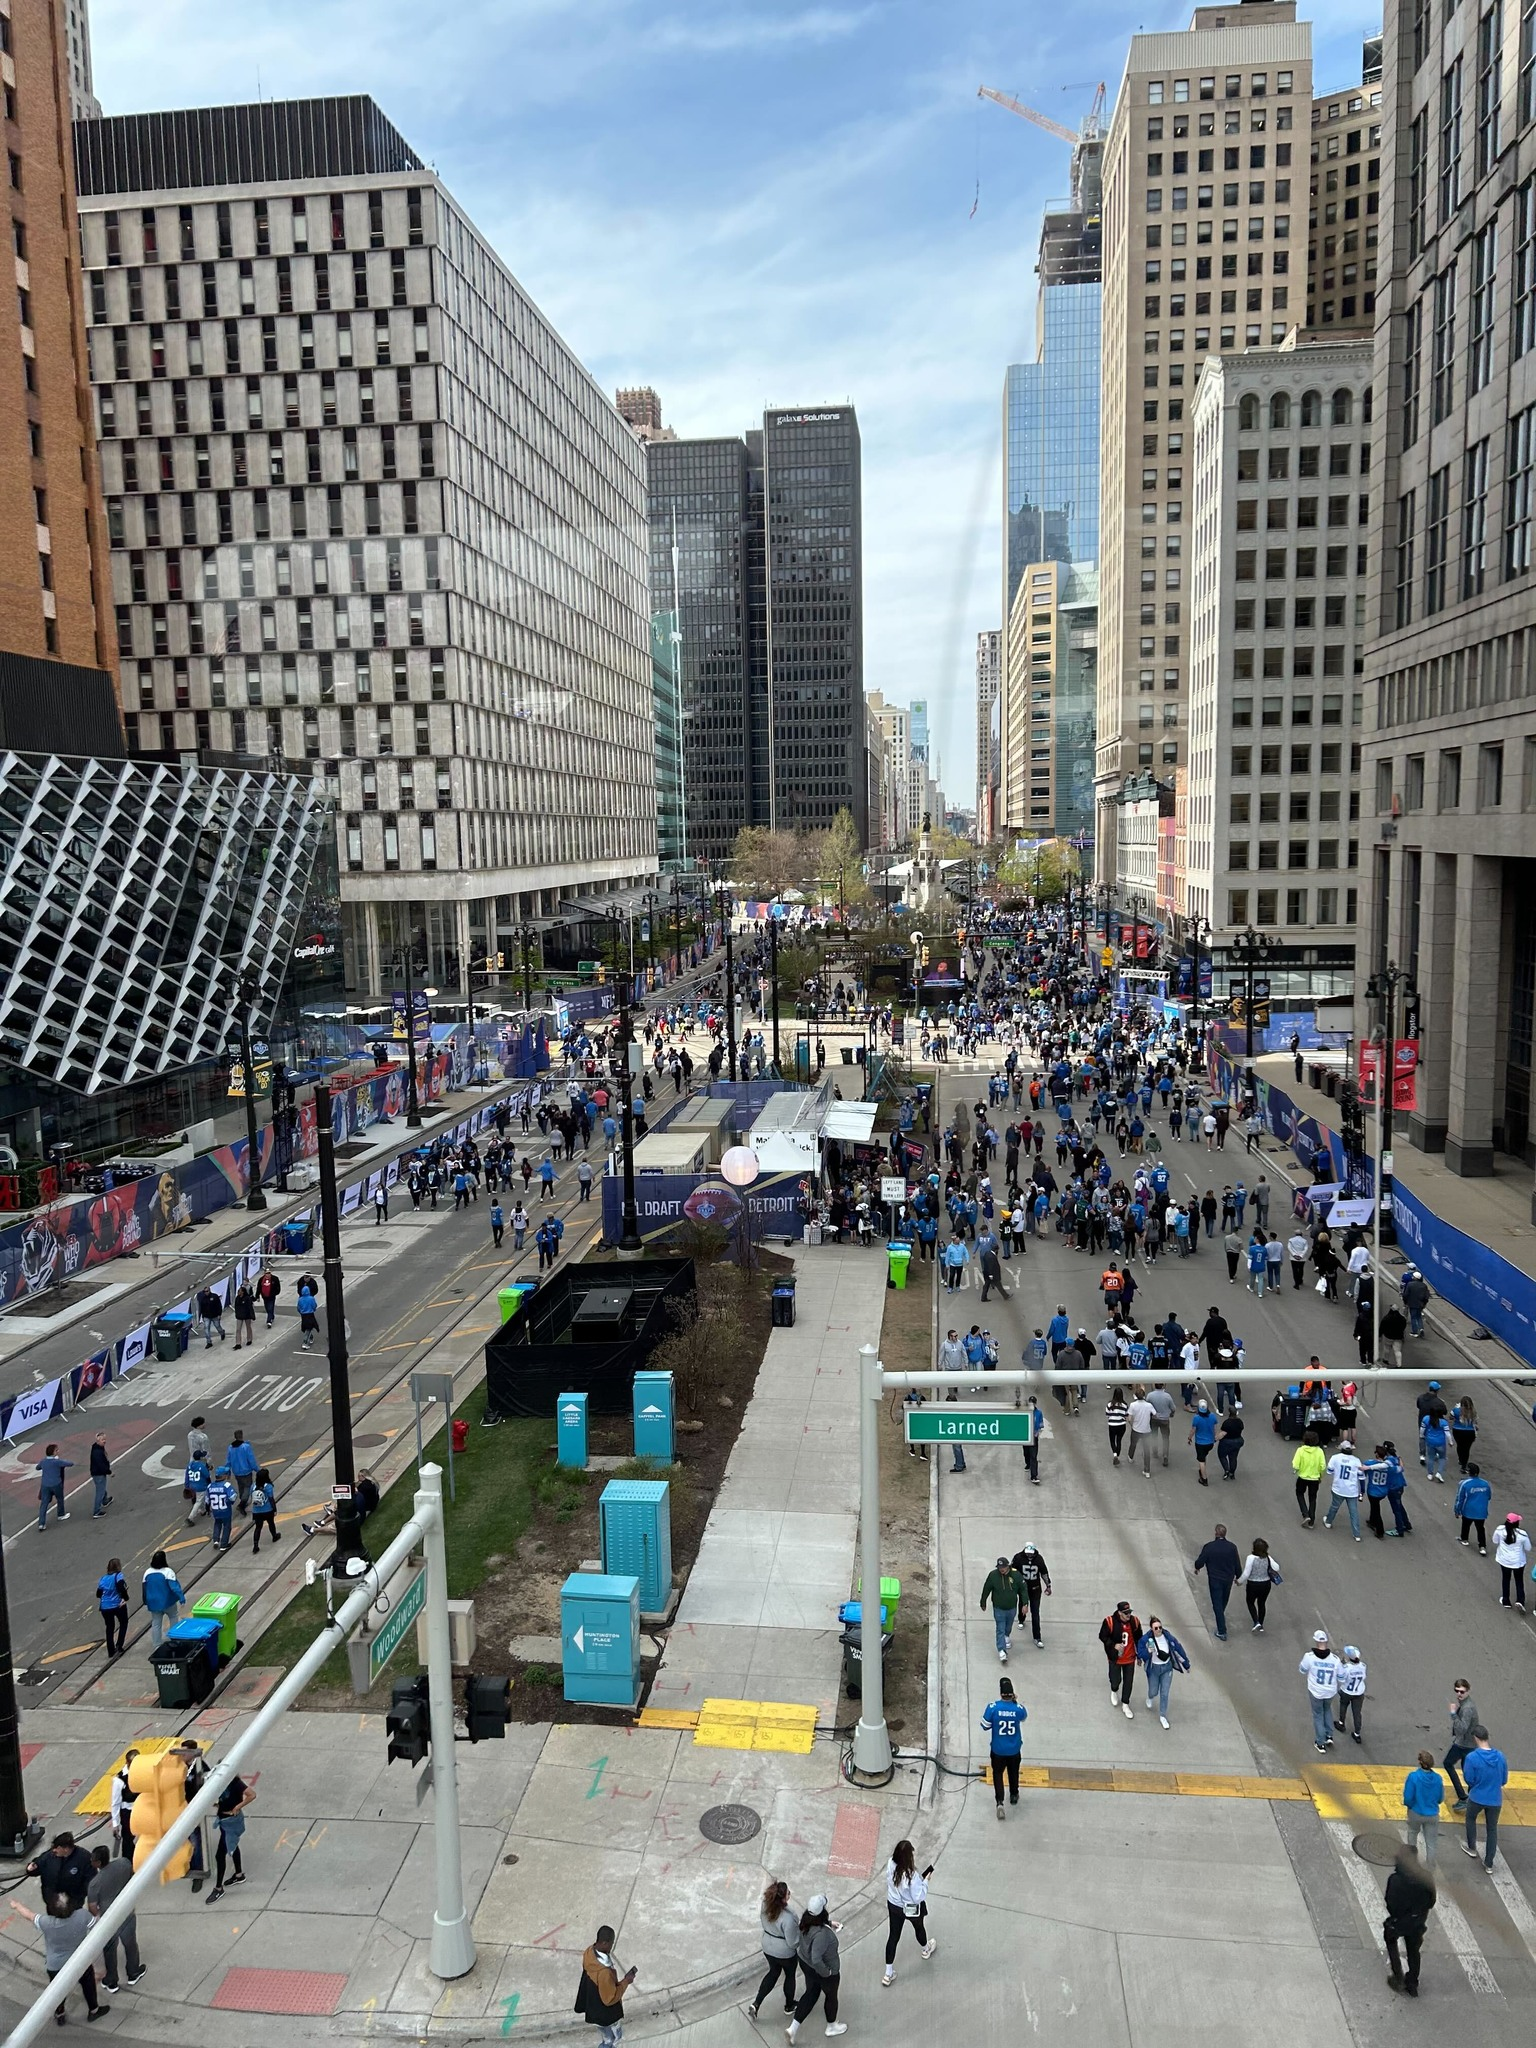 Fans at NFL Draft in Detroit liken it to New Years Eve in Times Square, Mardi Gras